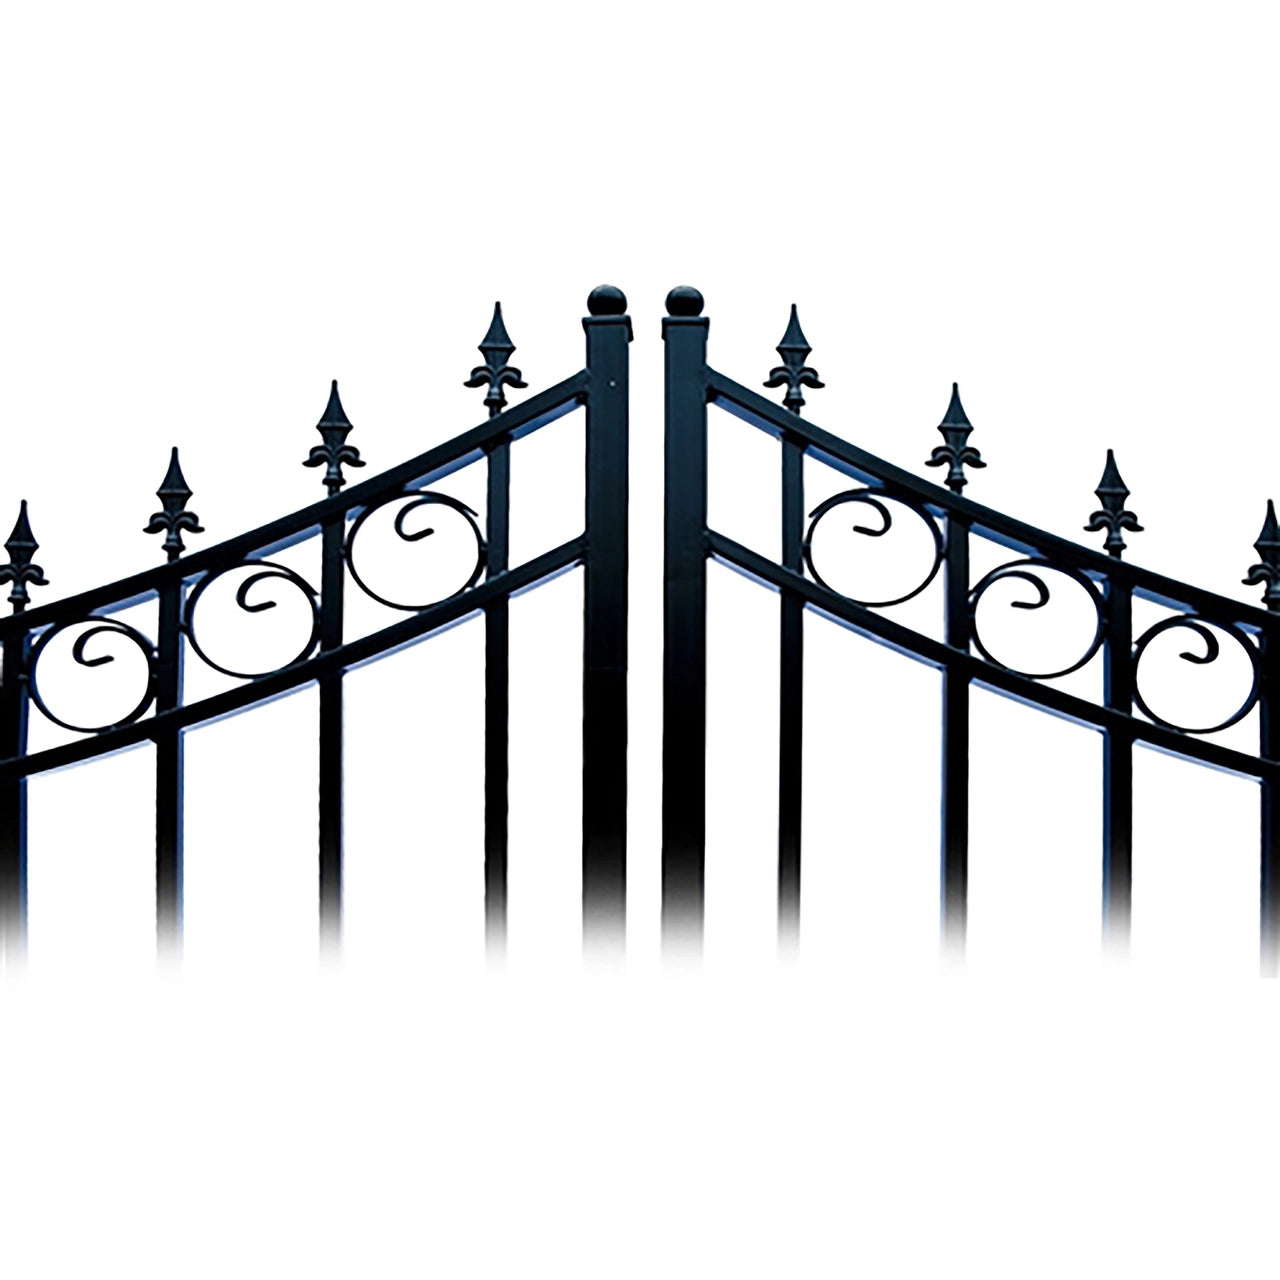 Aleko Steel Dual Swing Driveway Gate - MOSCOW Style - 14 ft with Pedestrian Gate - 5 ft